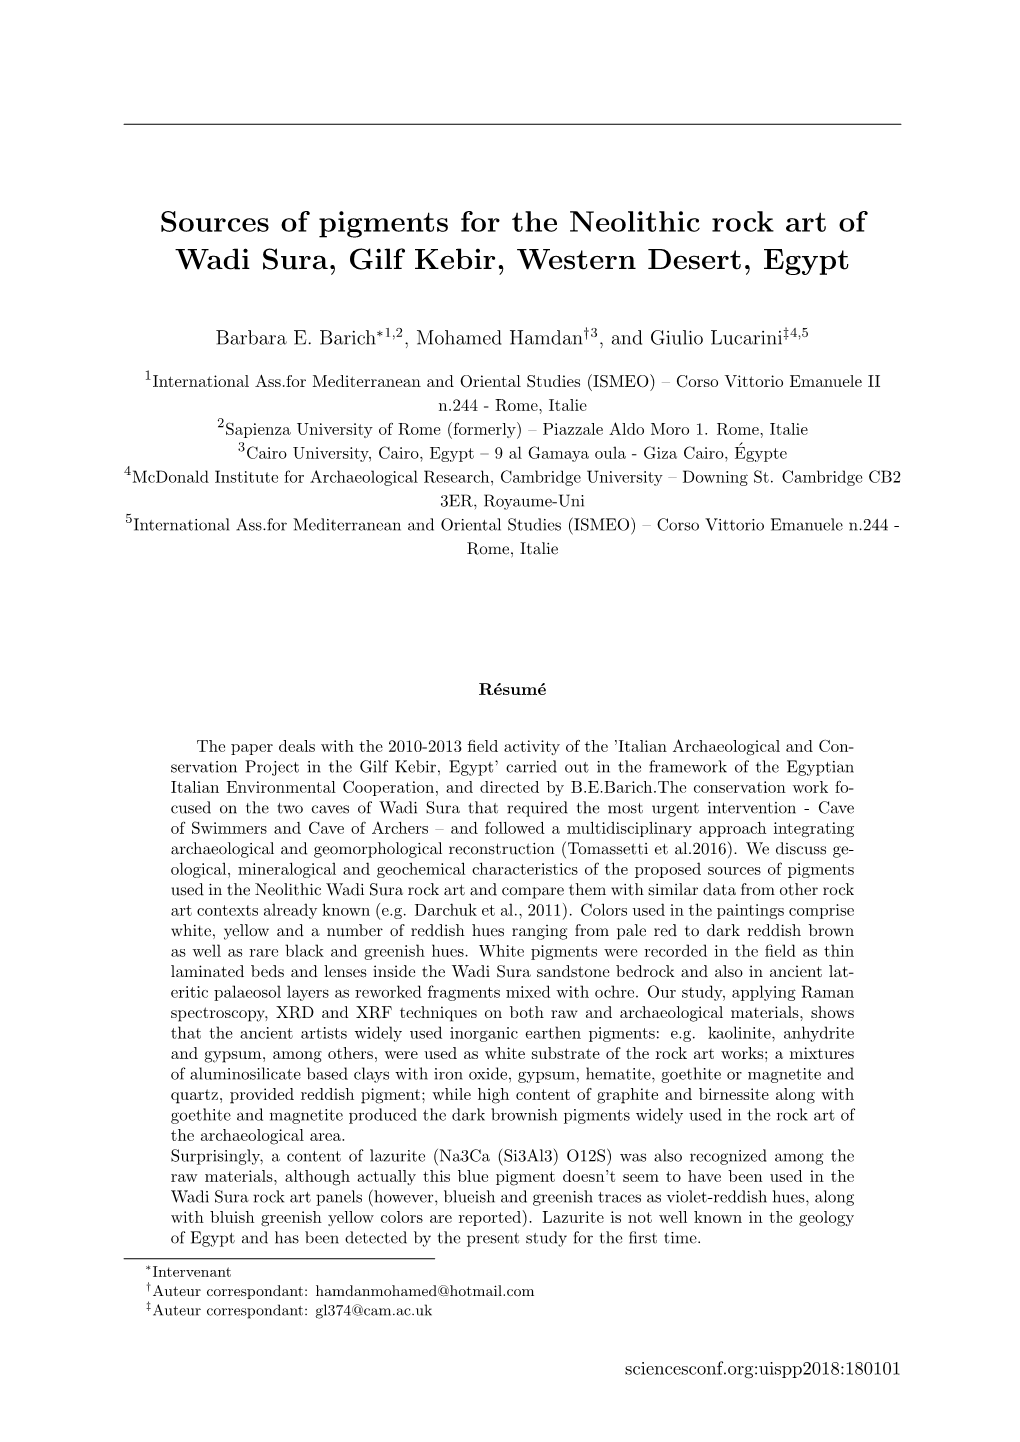 Sources of Pigments for the Neolithic Rock Art of Wadi Sura, Gilf Kebir, Western Desert, Egypt